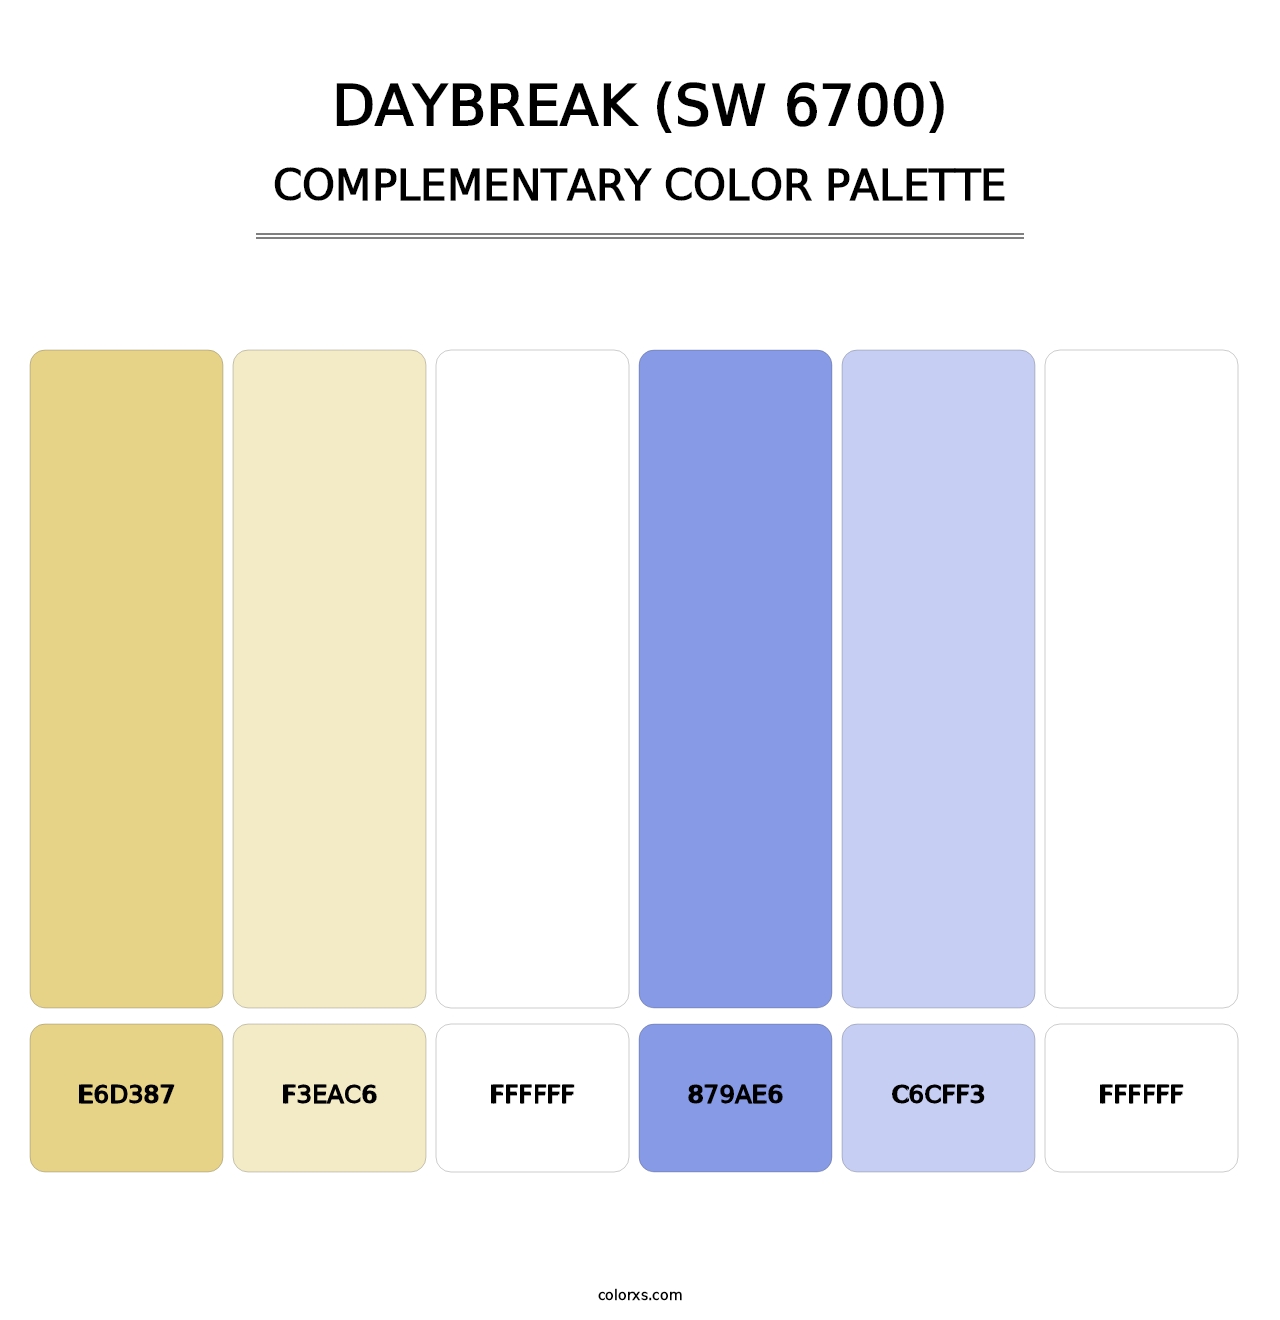 Daybreak (SW 6700) - Complementary Color Palette